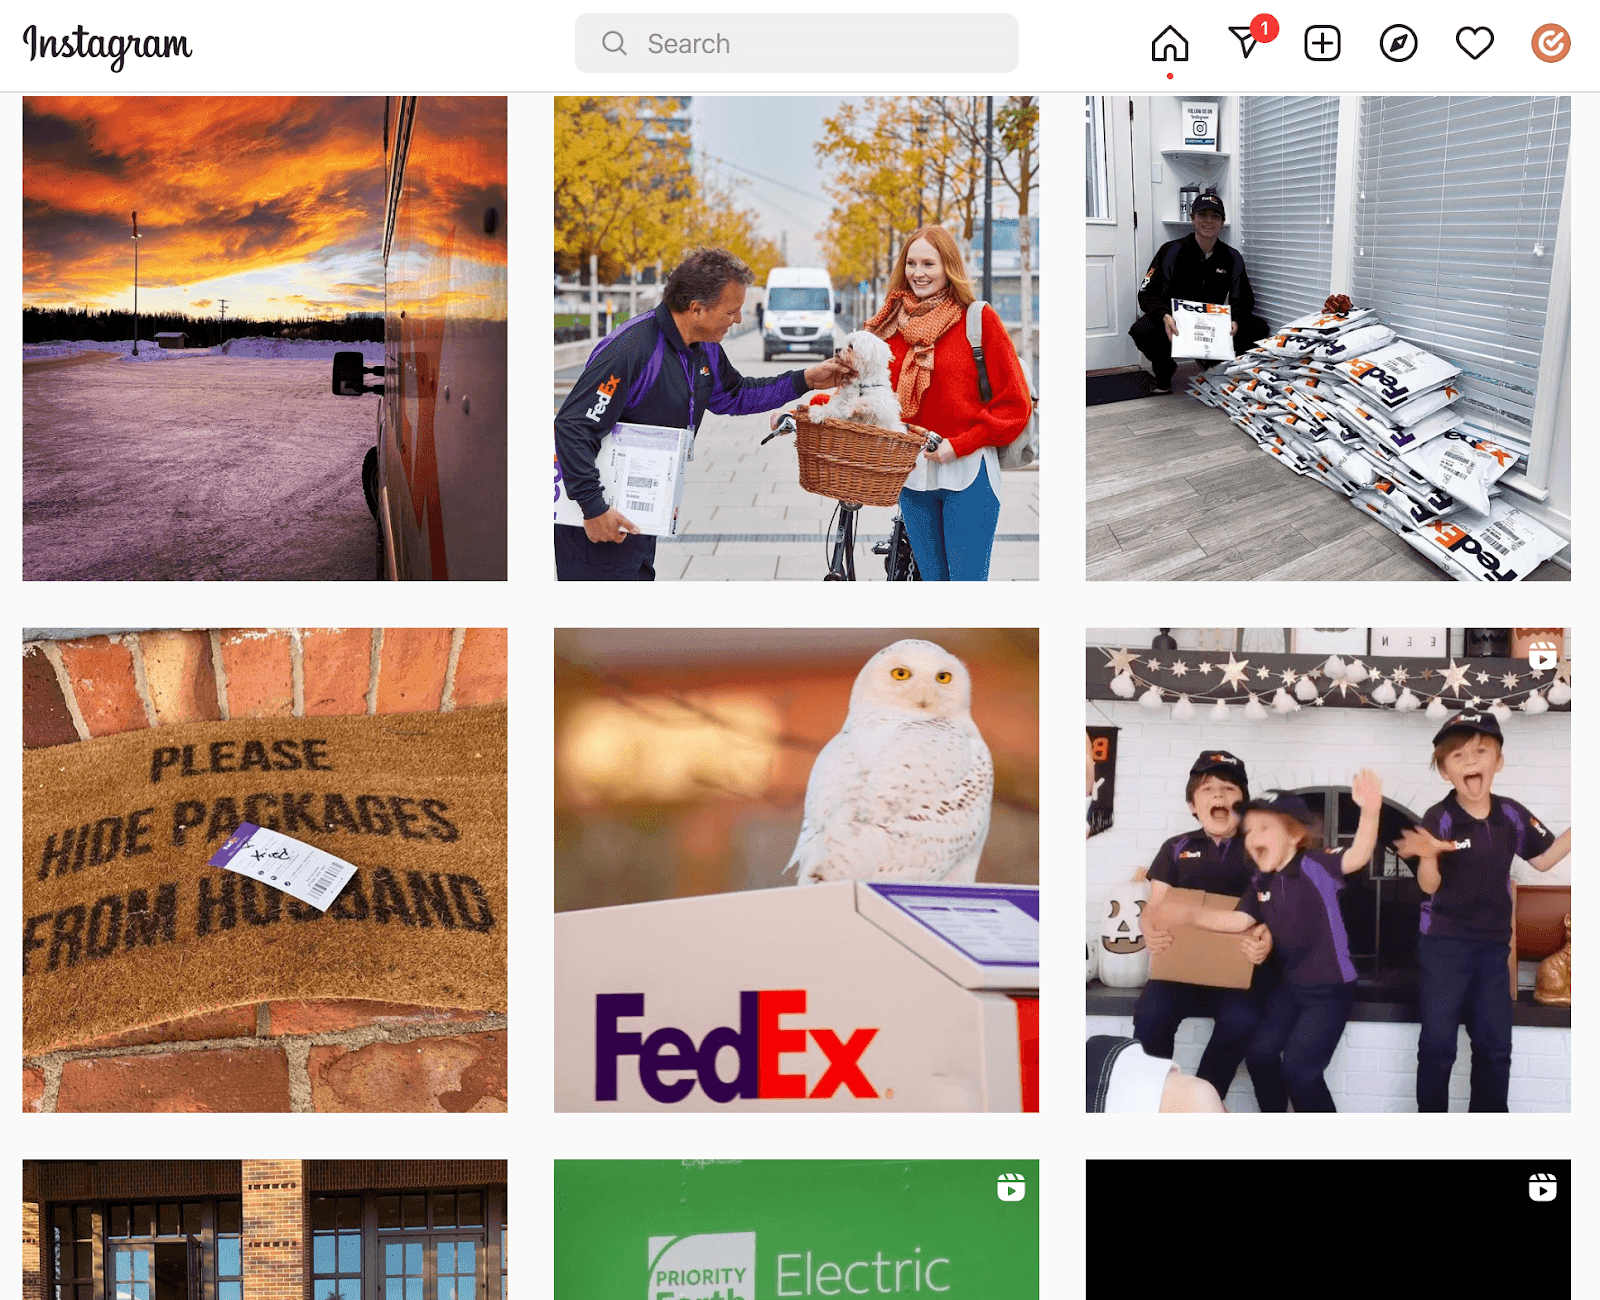 FedEx uses Instagram to drive user engagement